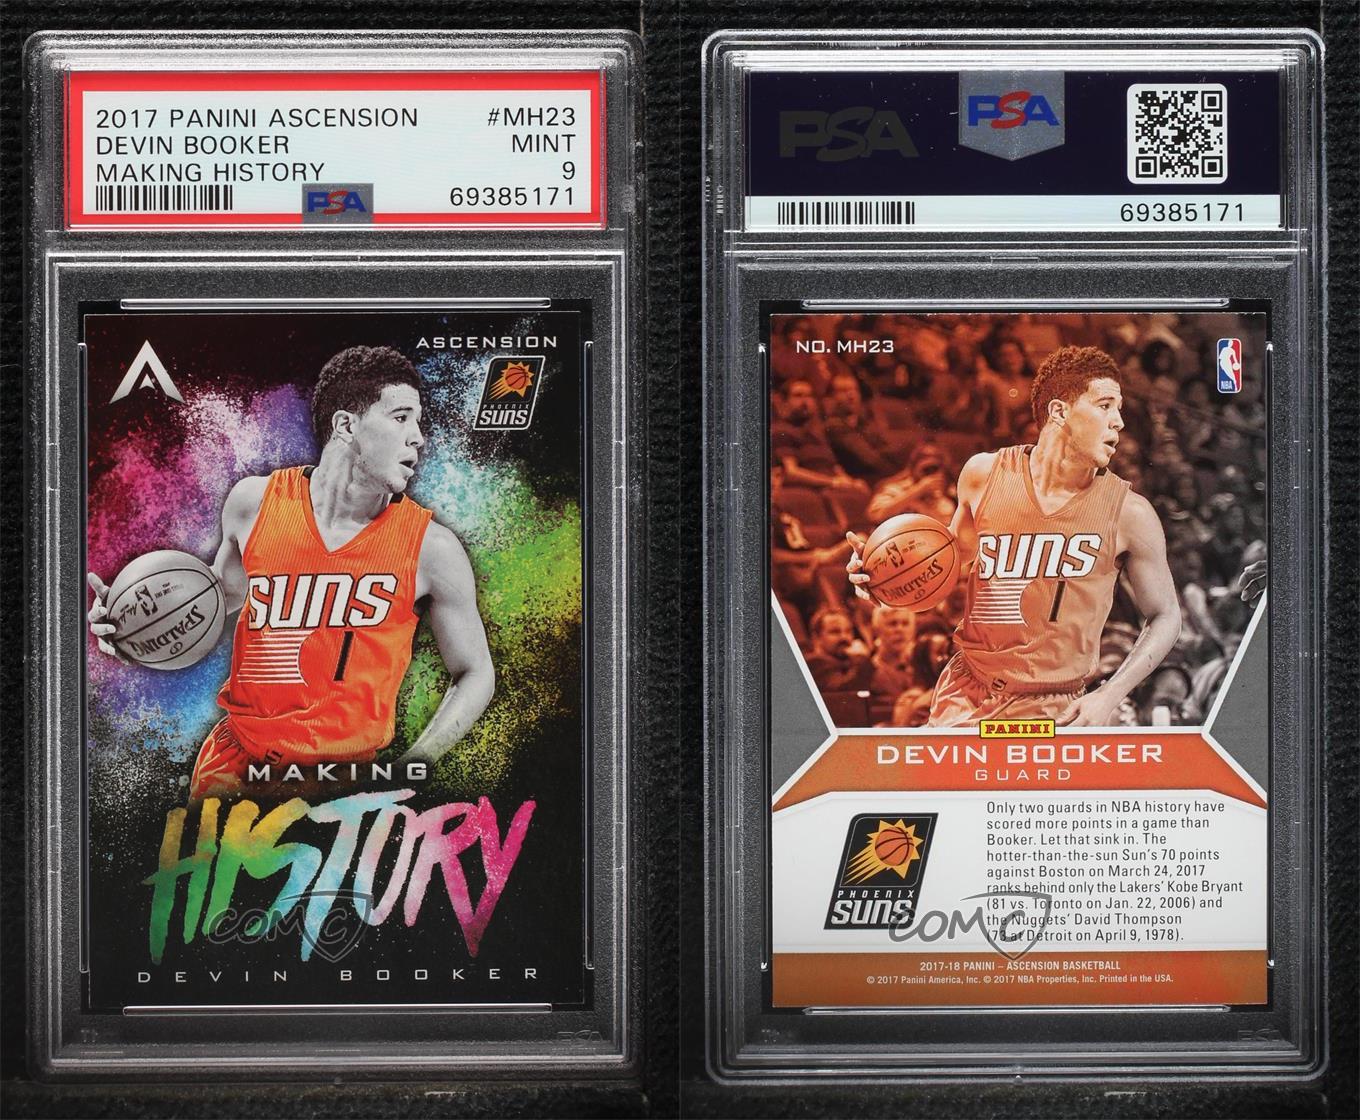 SP /199 BGS 9 MINT W/ 2 X 10'S 2017 DEVIN BOOKER ASCENSION AUTO SIGNED G4698